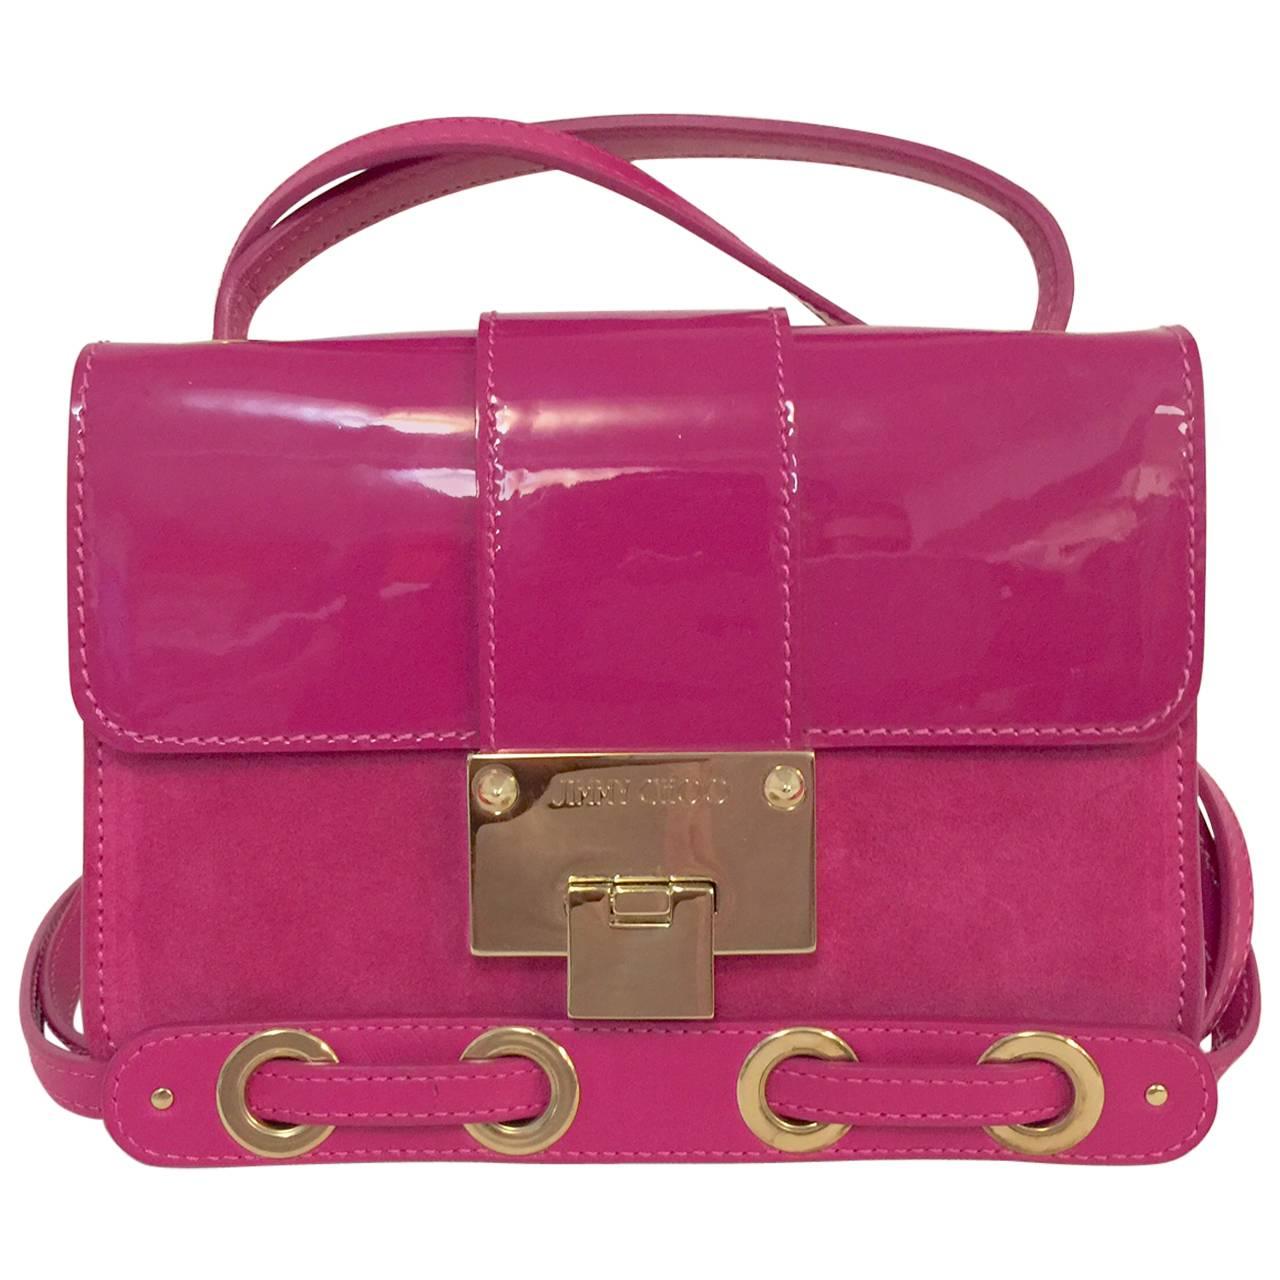 Jimmy Choo Jazzberry Patent Leather and Suede Rebel Crossbody Bag